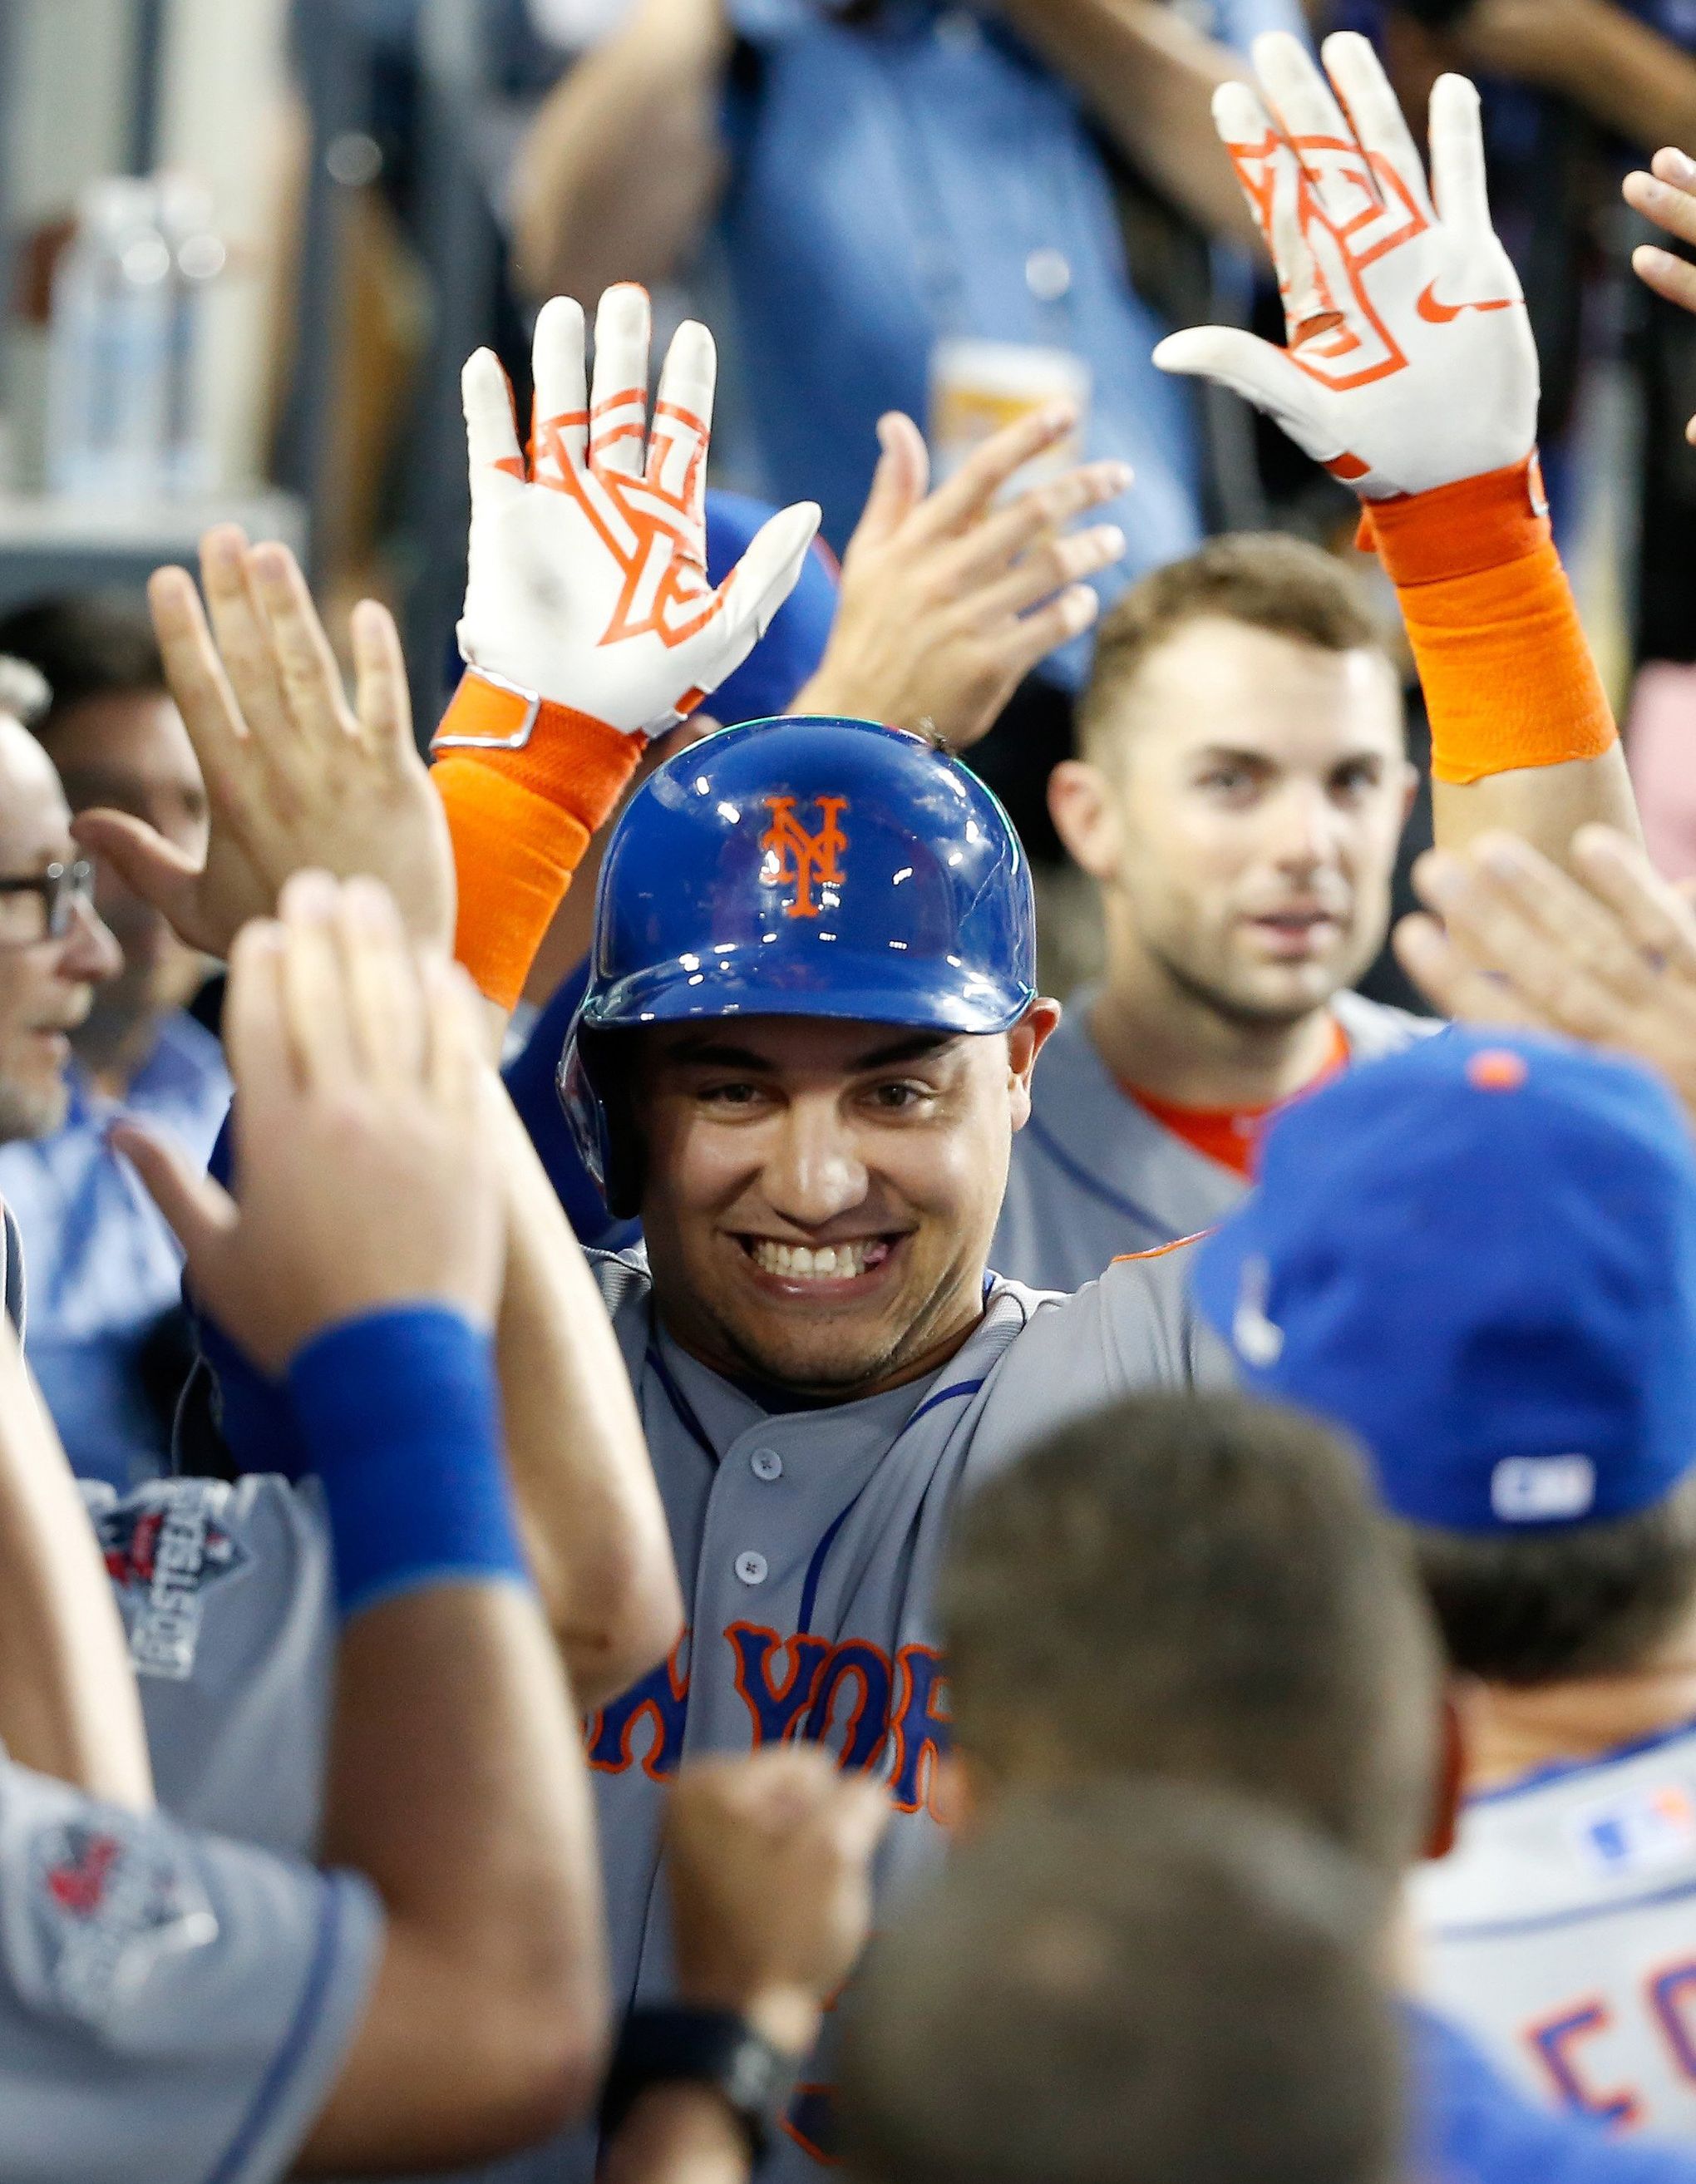 Redmond's Michael Conforto brings grassroots charm, and a powerful bat, to  Mets and World Series